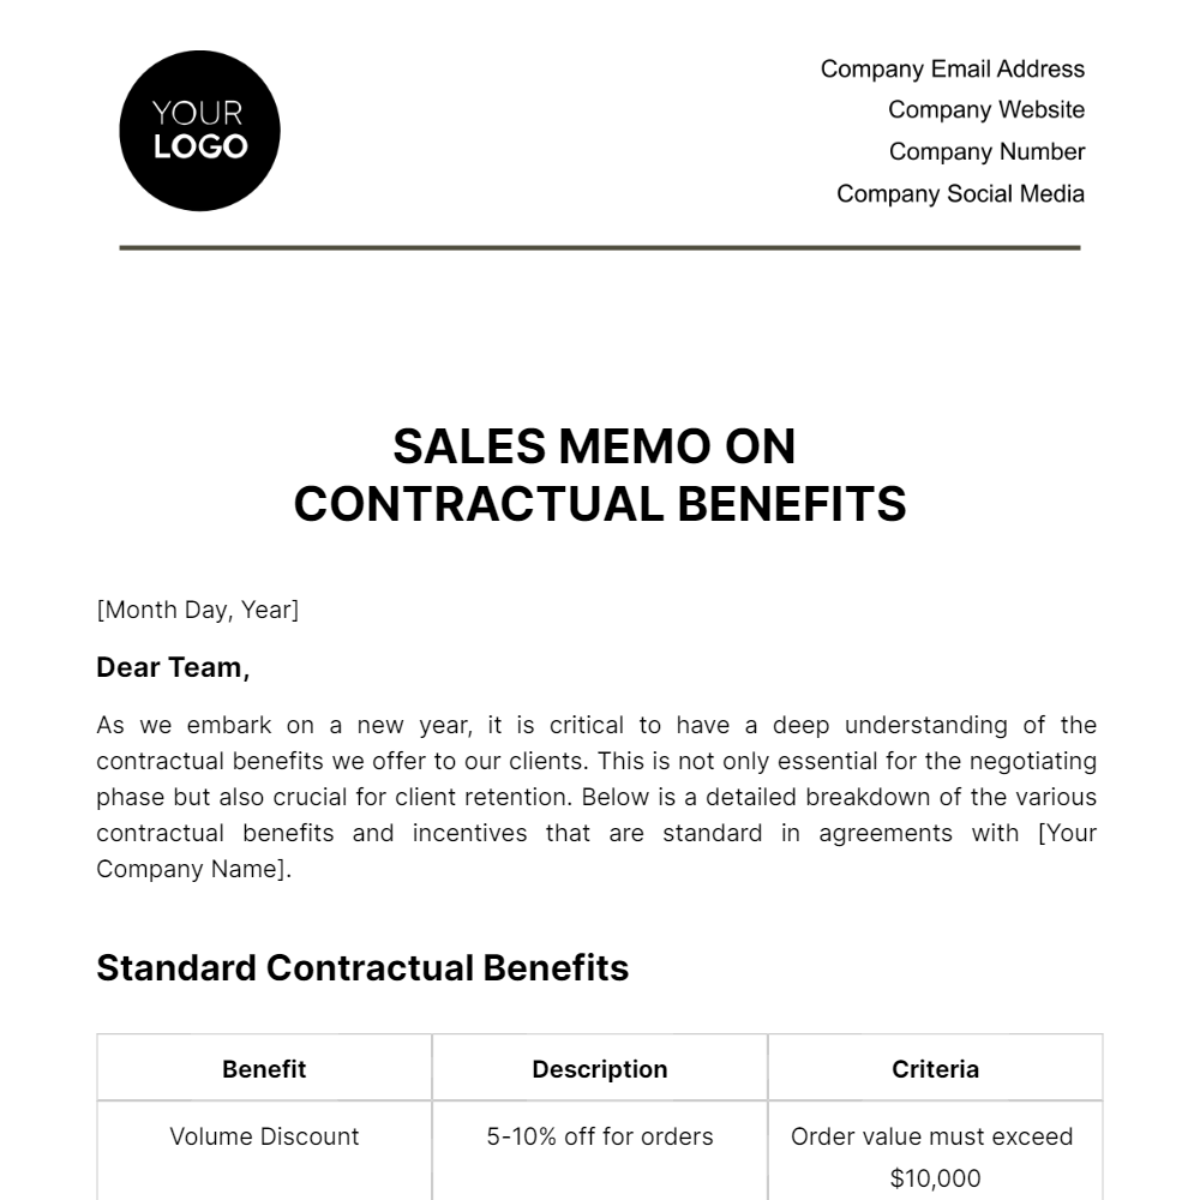 Sales Memo on Contractual Benefits Template